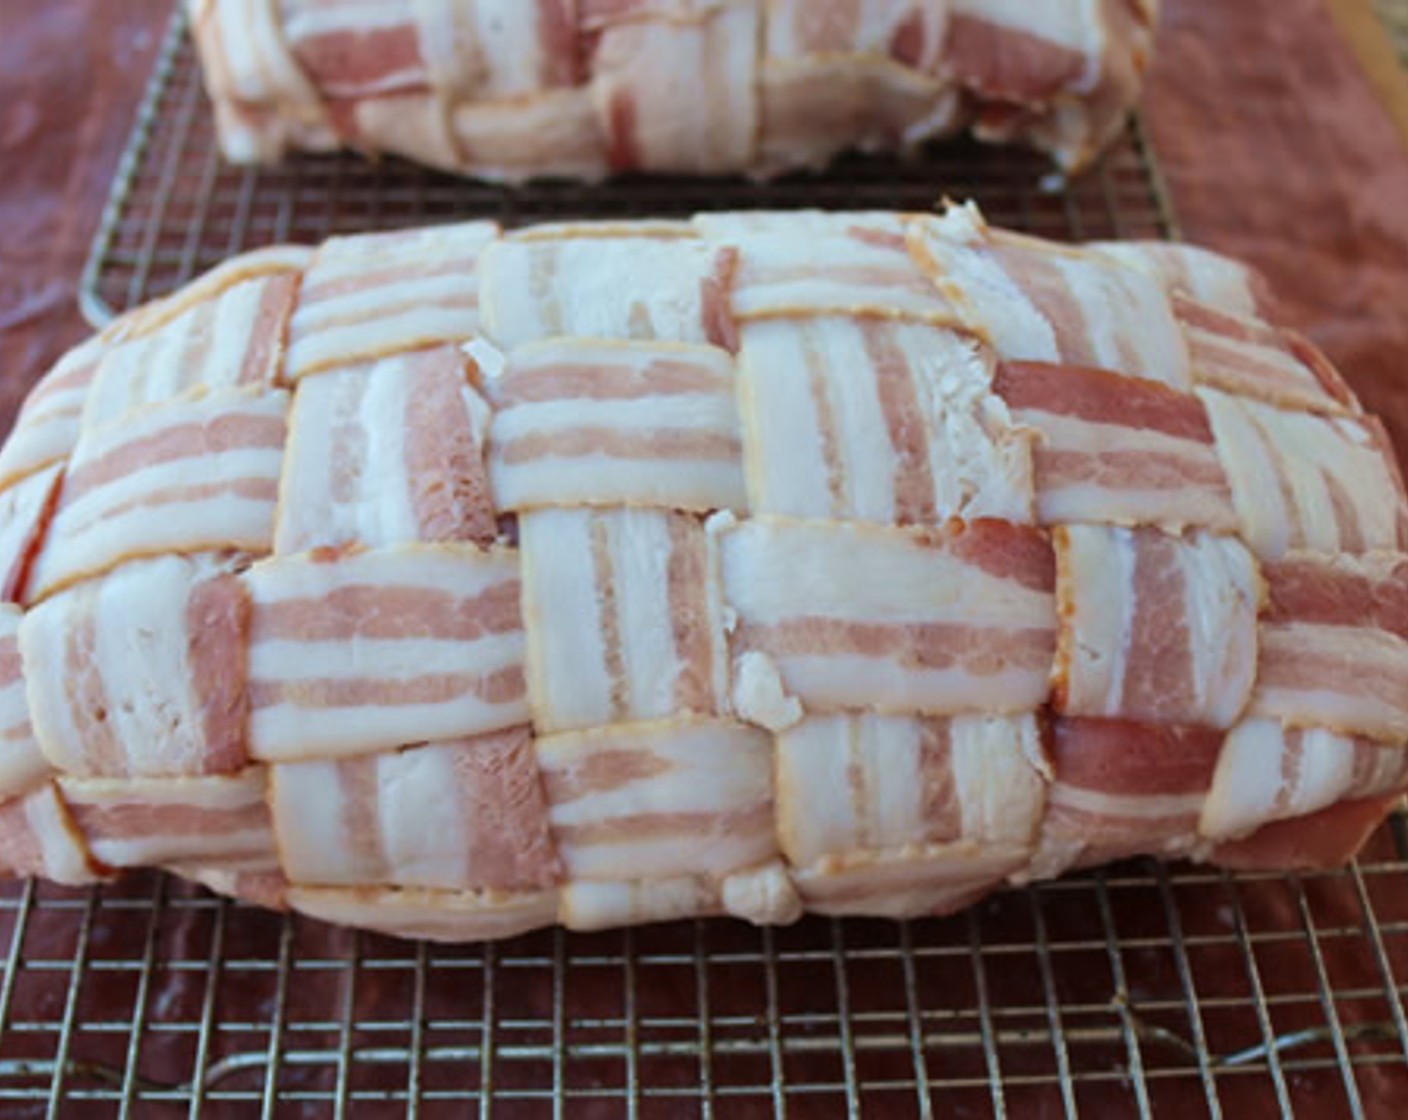 step 8 Unwrap each mini turducken and place on bacon weave turkey side down. Wrap bacon around turducken and fold edges. Place on greased wire cooking rack.